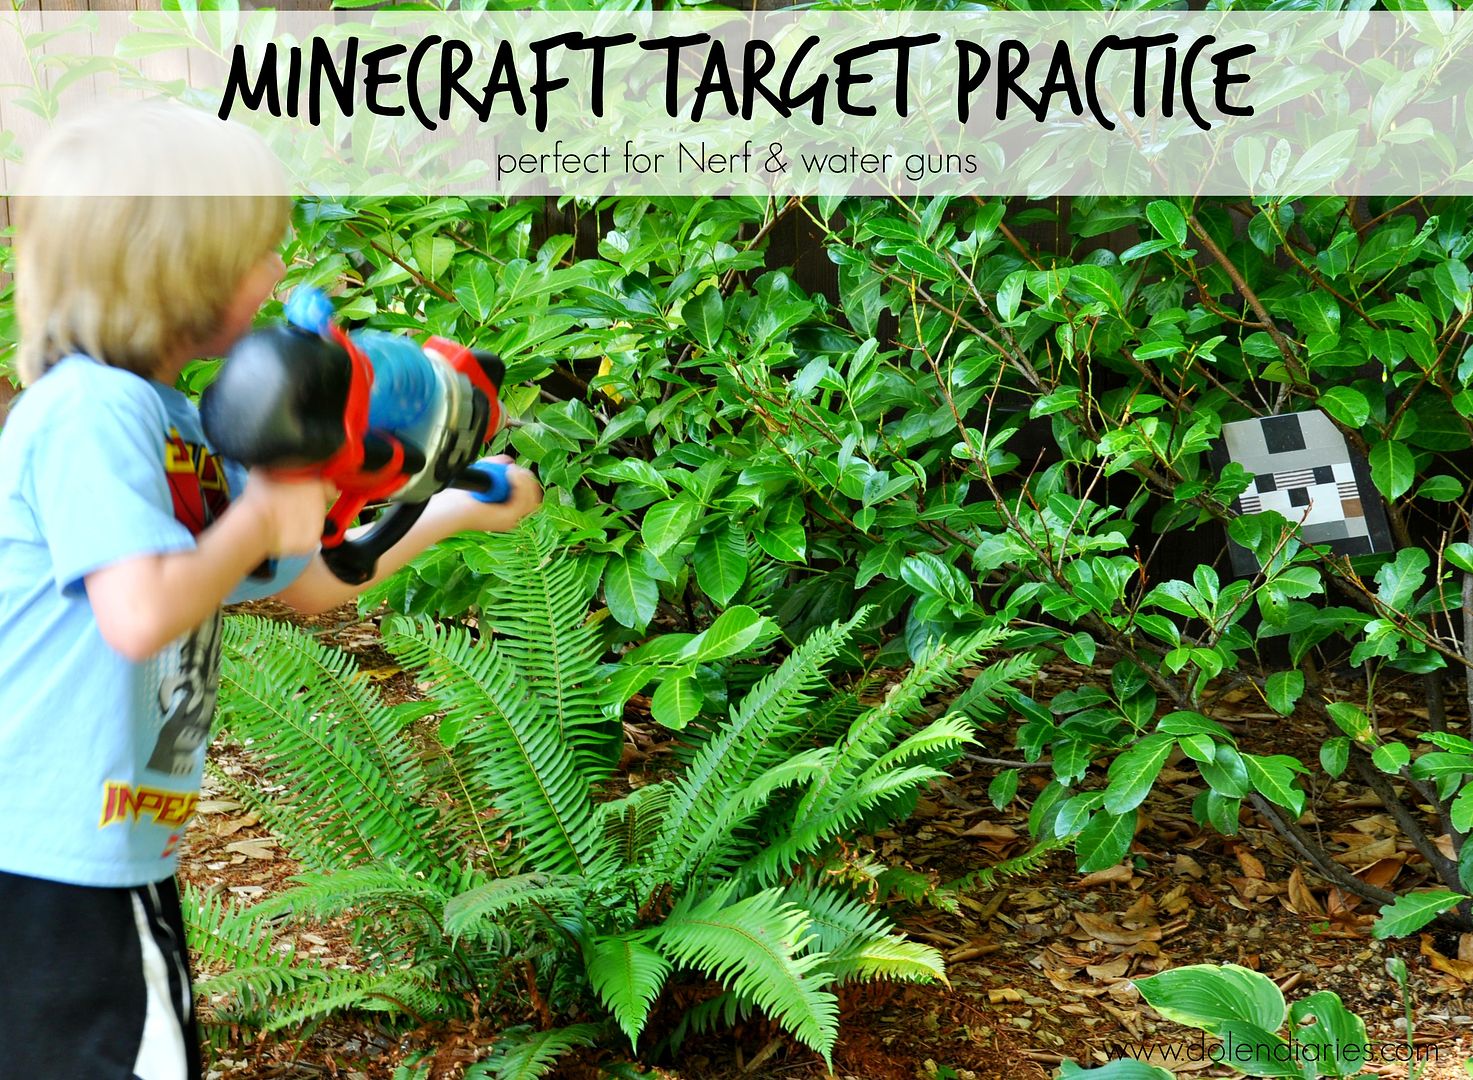 Minecraft Target Practice {perfect for Nerf & water guns} from Dolen Diaries